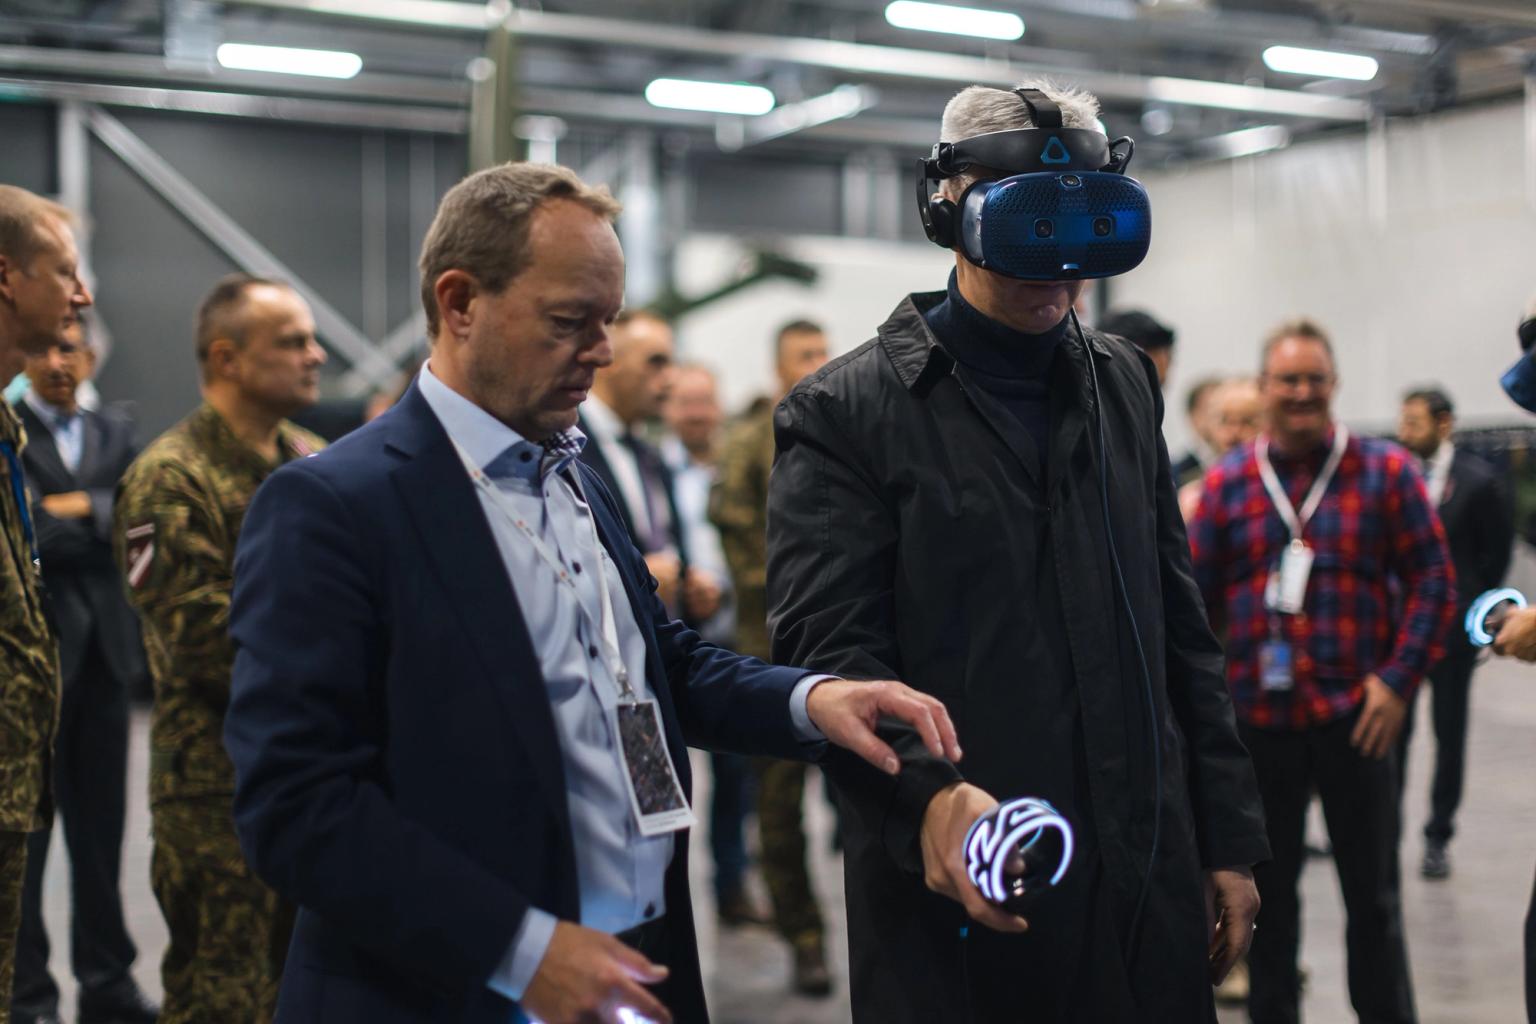 Latvia’s prime minister Krišjānis Kariņš got to test Fynd CORE on a Vive Cosmos during a demo of how CORE can be used for military training and operation